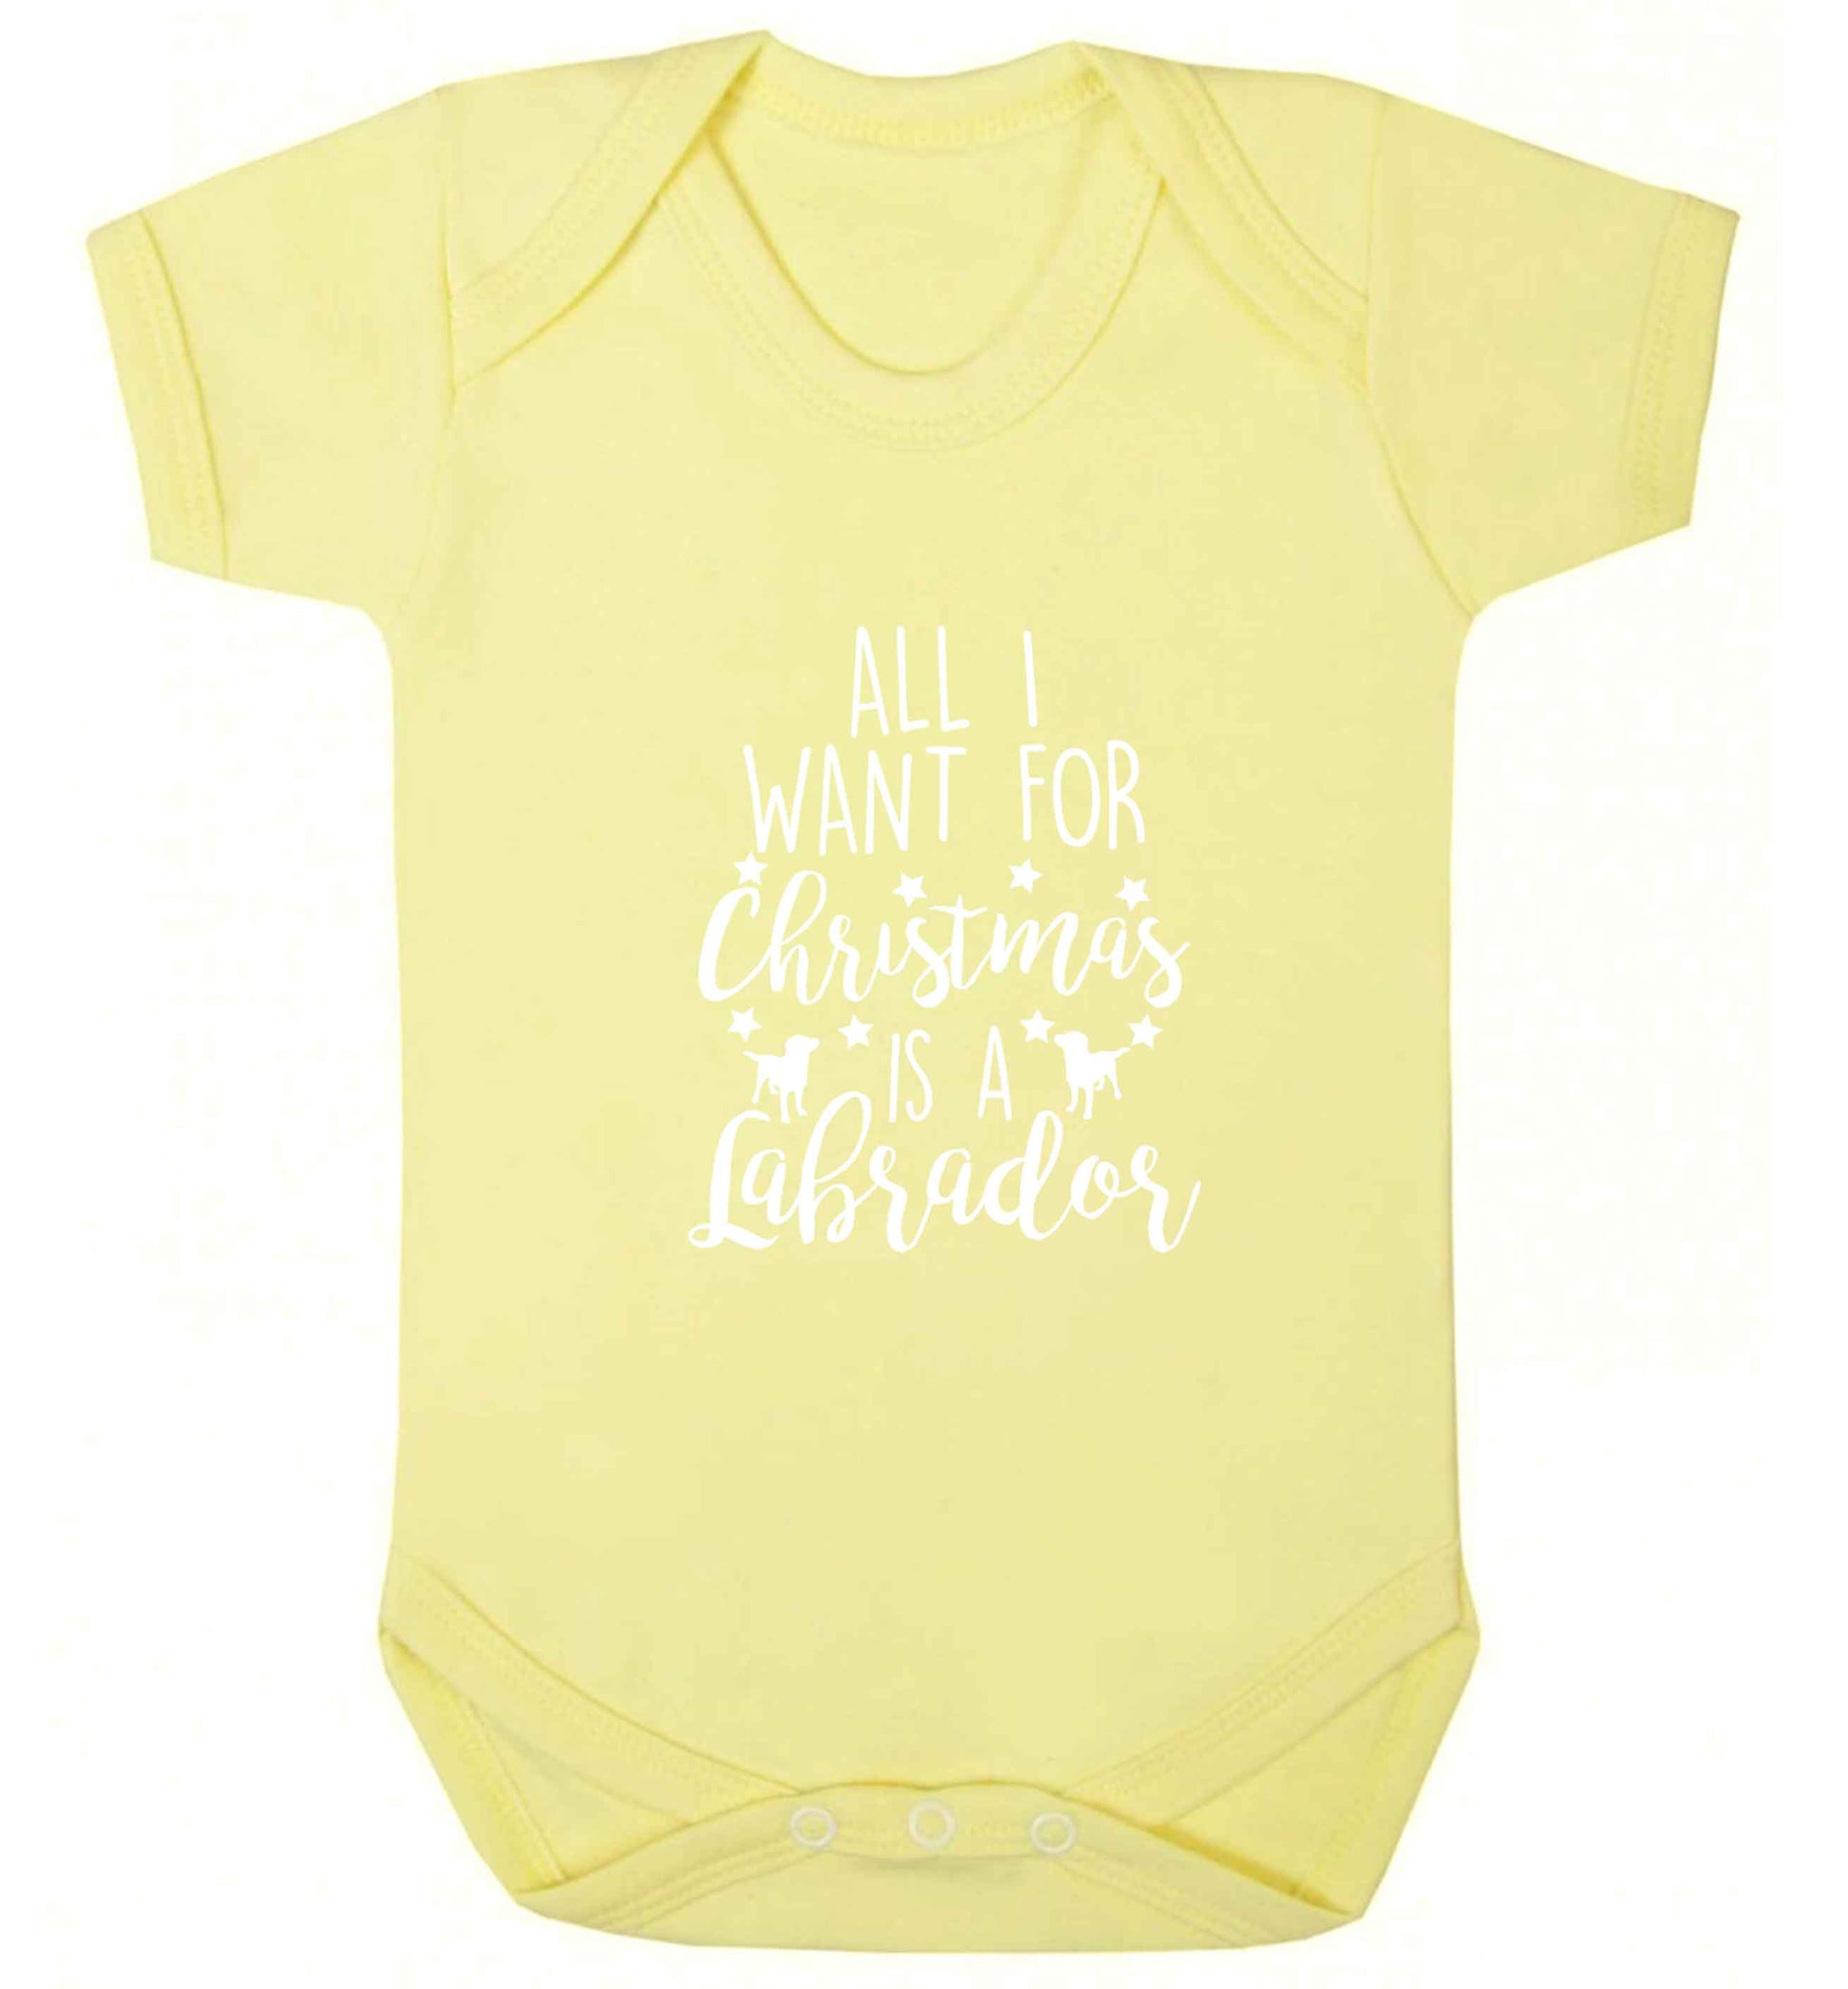 All I want for Christmas is a labrador baby vest pale yellow 18-24 months